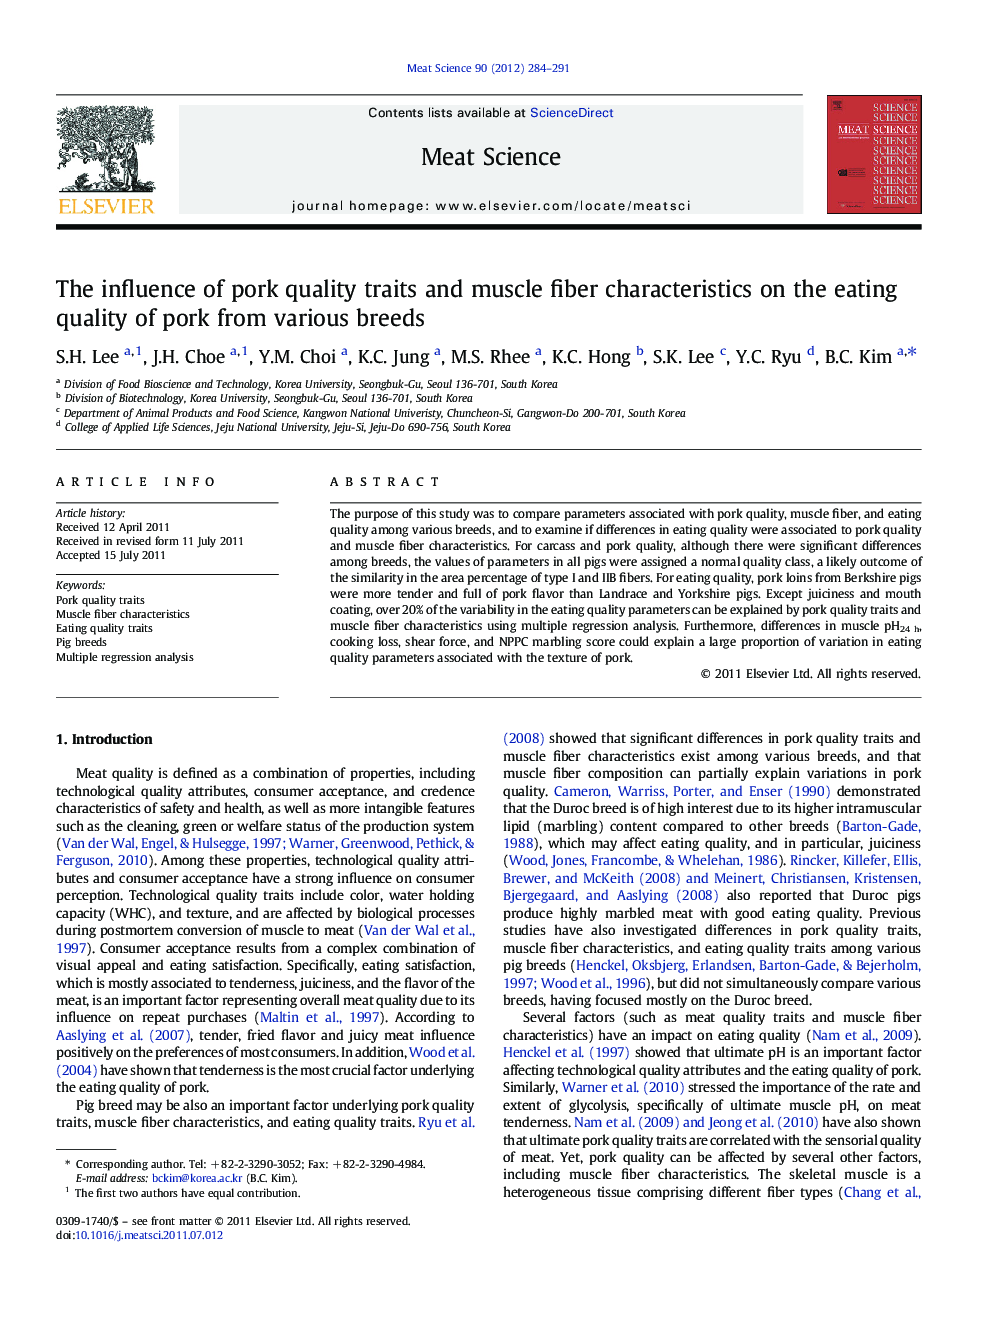 The influence of pork quality traits and muscle fiber characteristics on the eating quality of pork from various breeds